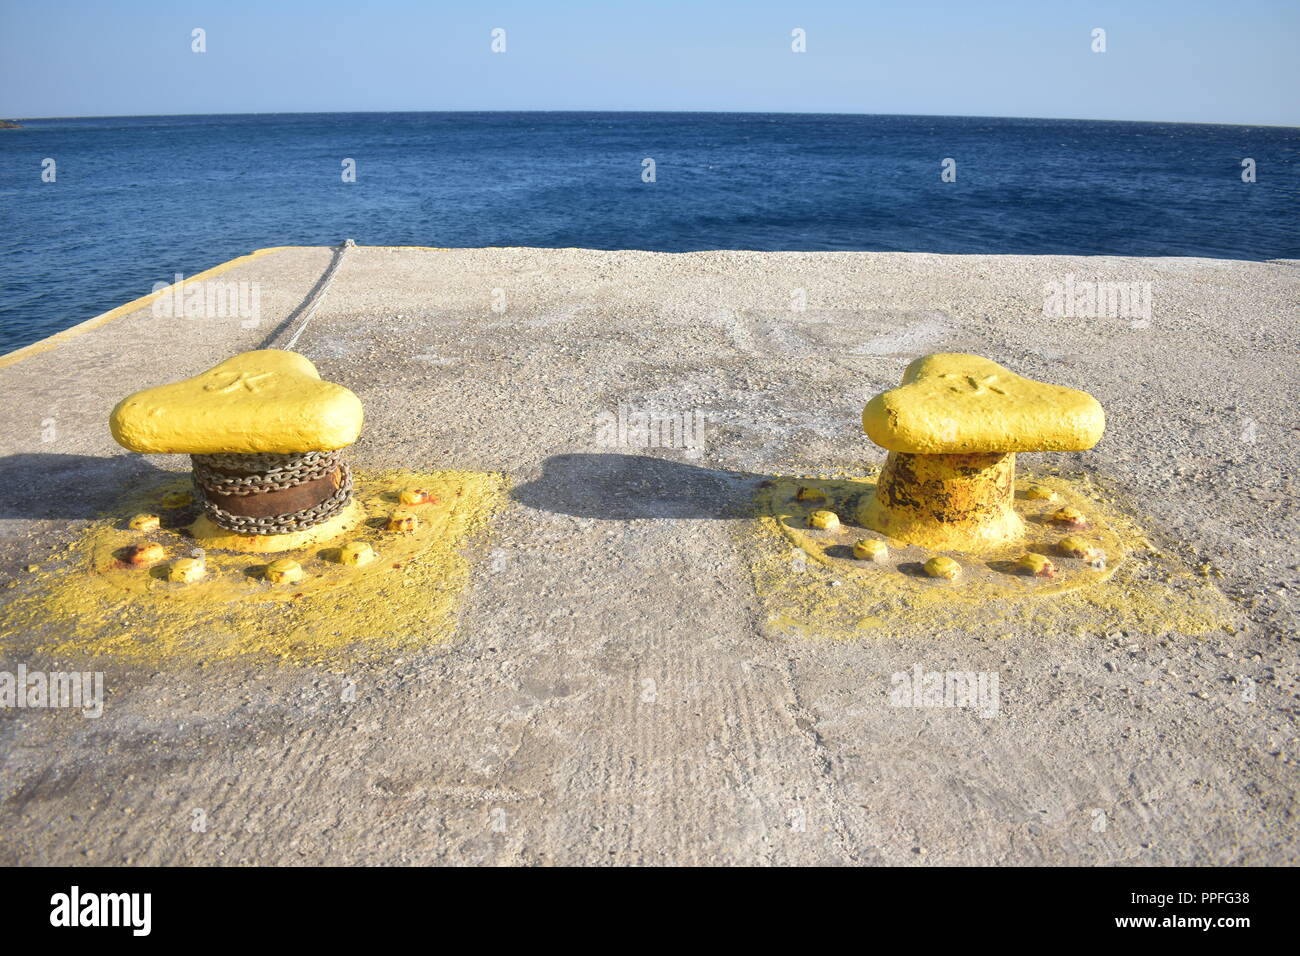 Greece, the charming, remote island of Sikinos.  Two metal yellow painted bollards at the dock of the bay, at the edge of the sea. Stock Photo